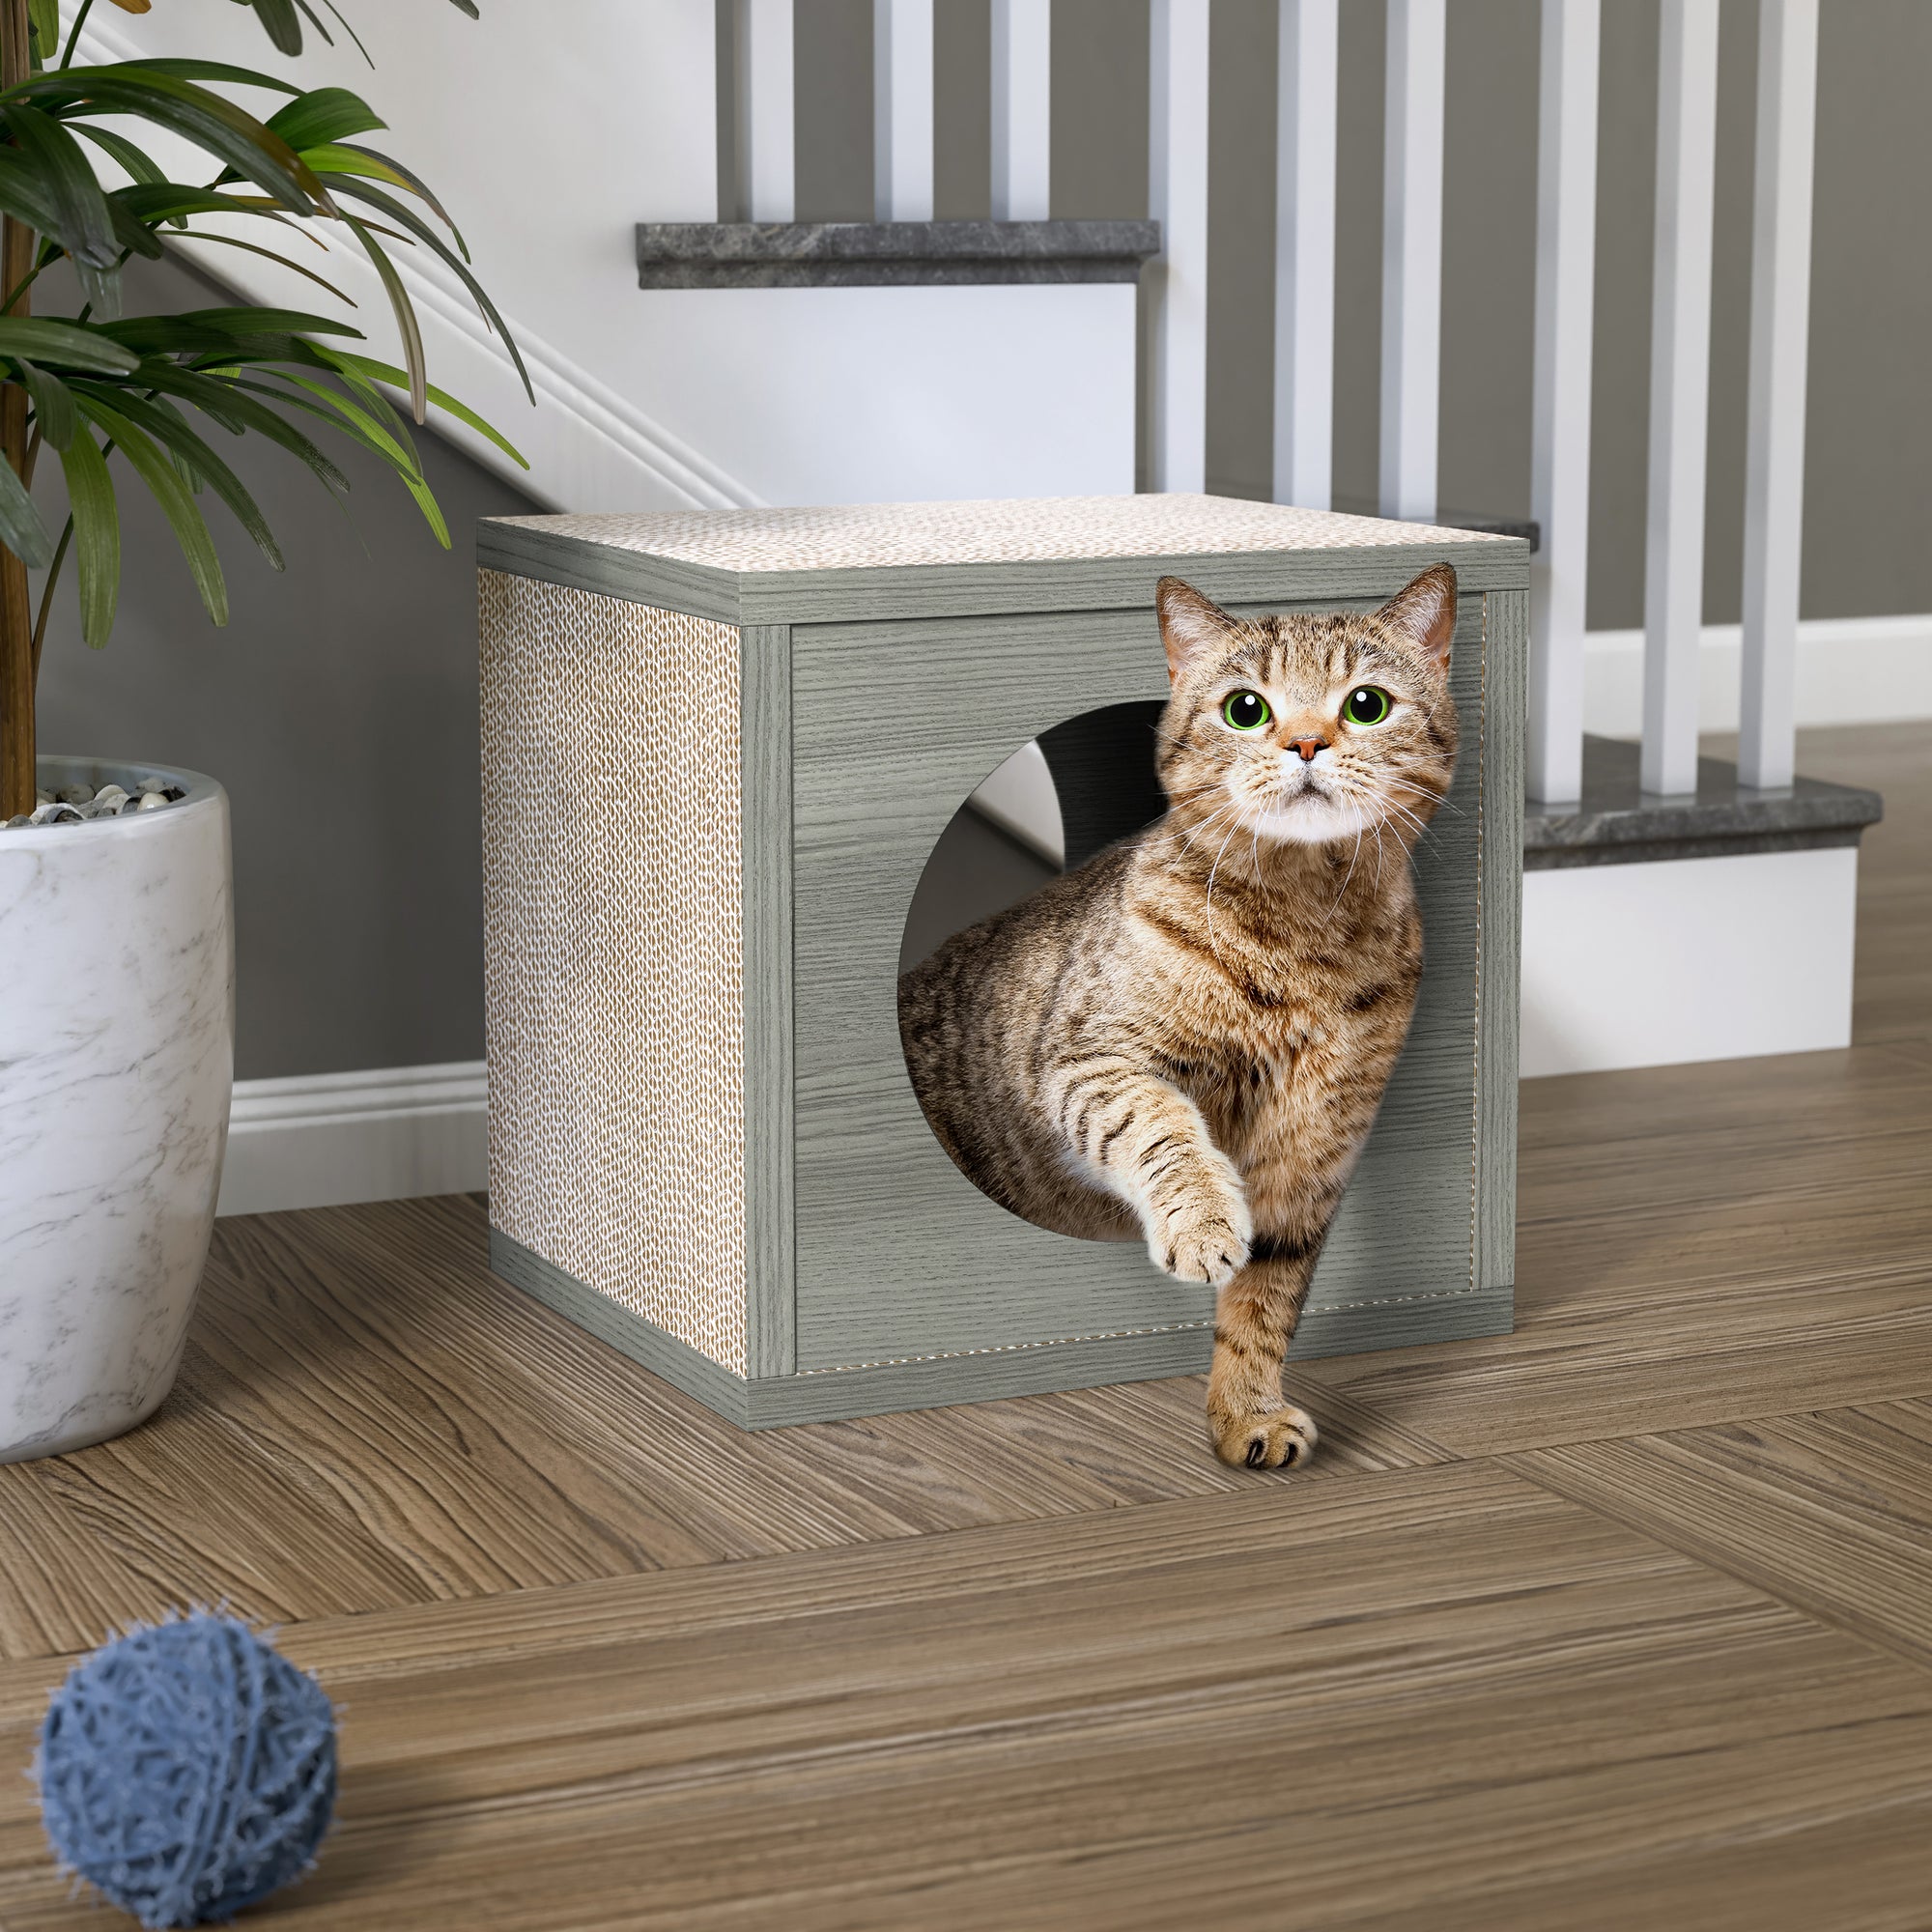 Katsquare Cube Scratching Post, London Grey (New Color)